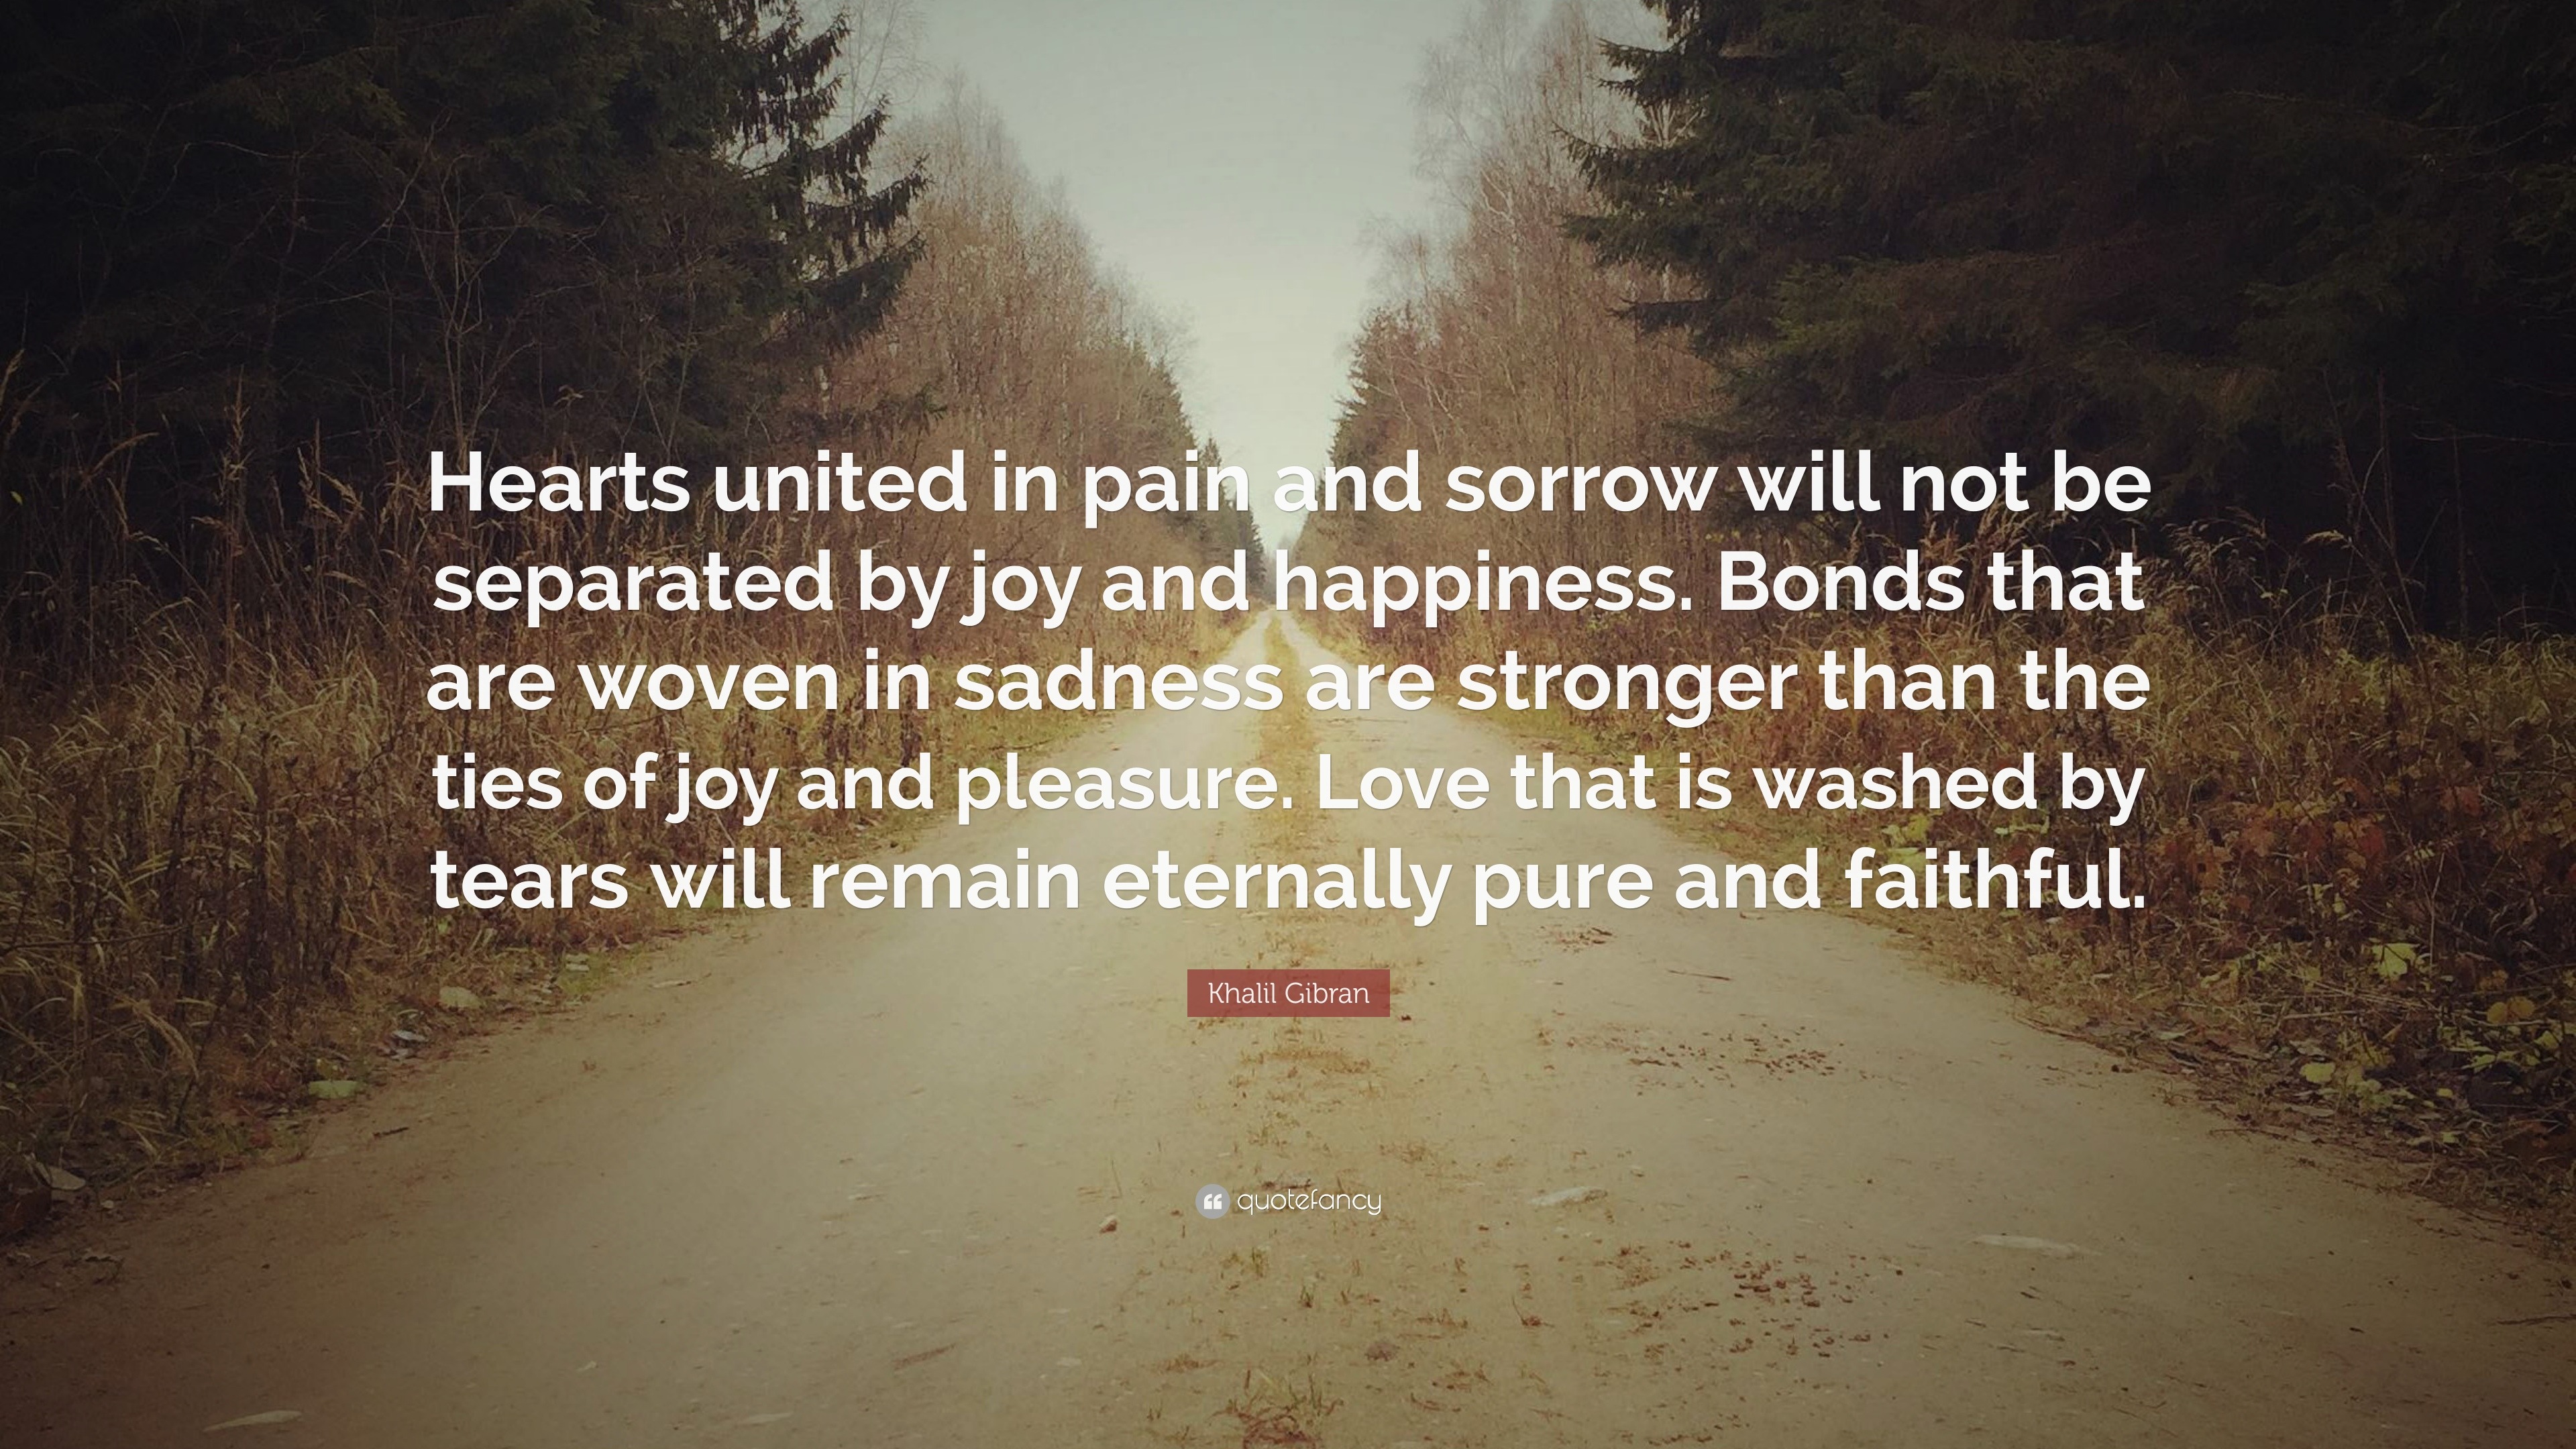 Pain Quotes “Hearts united in pain and sorrow will not be separated by joy